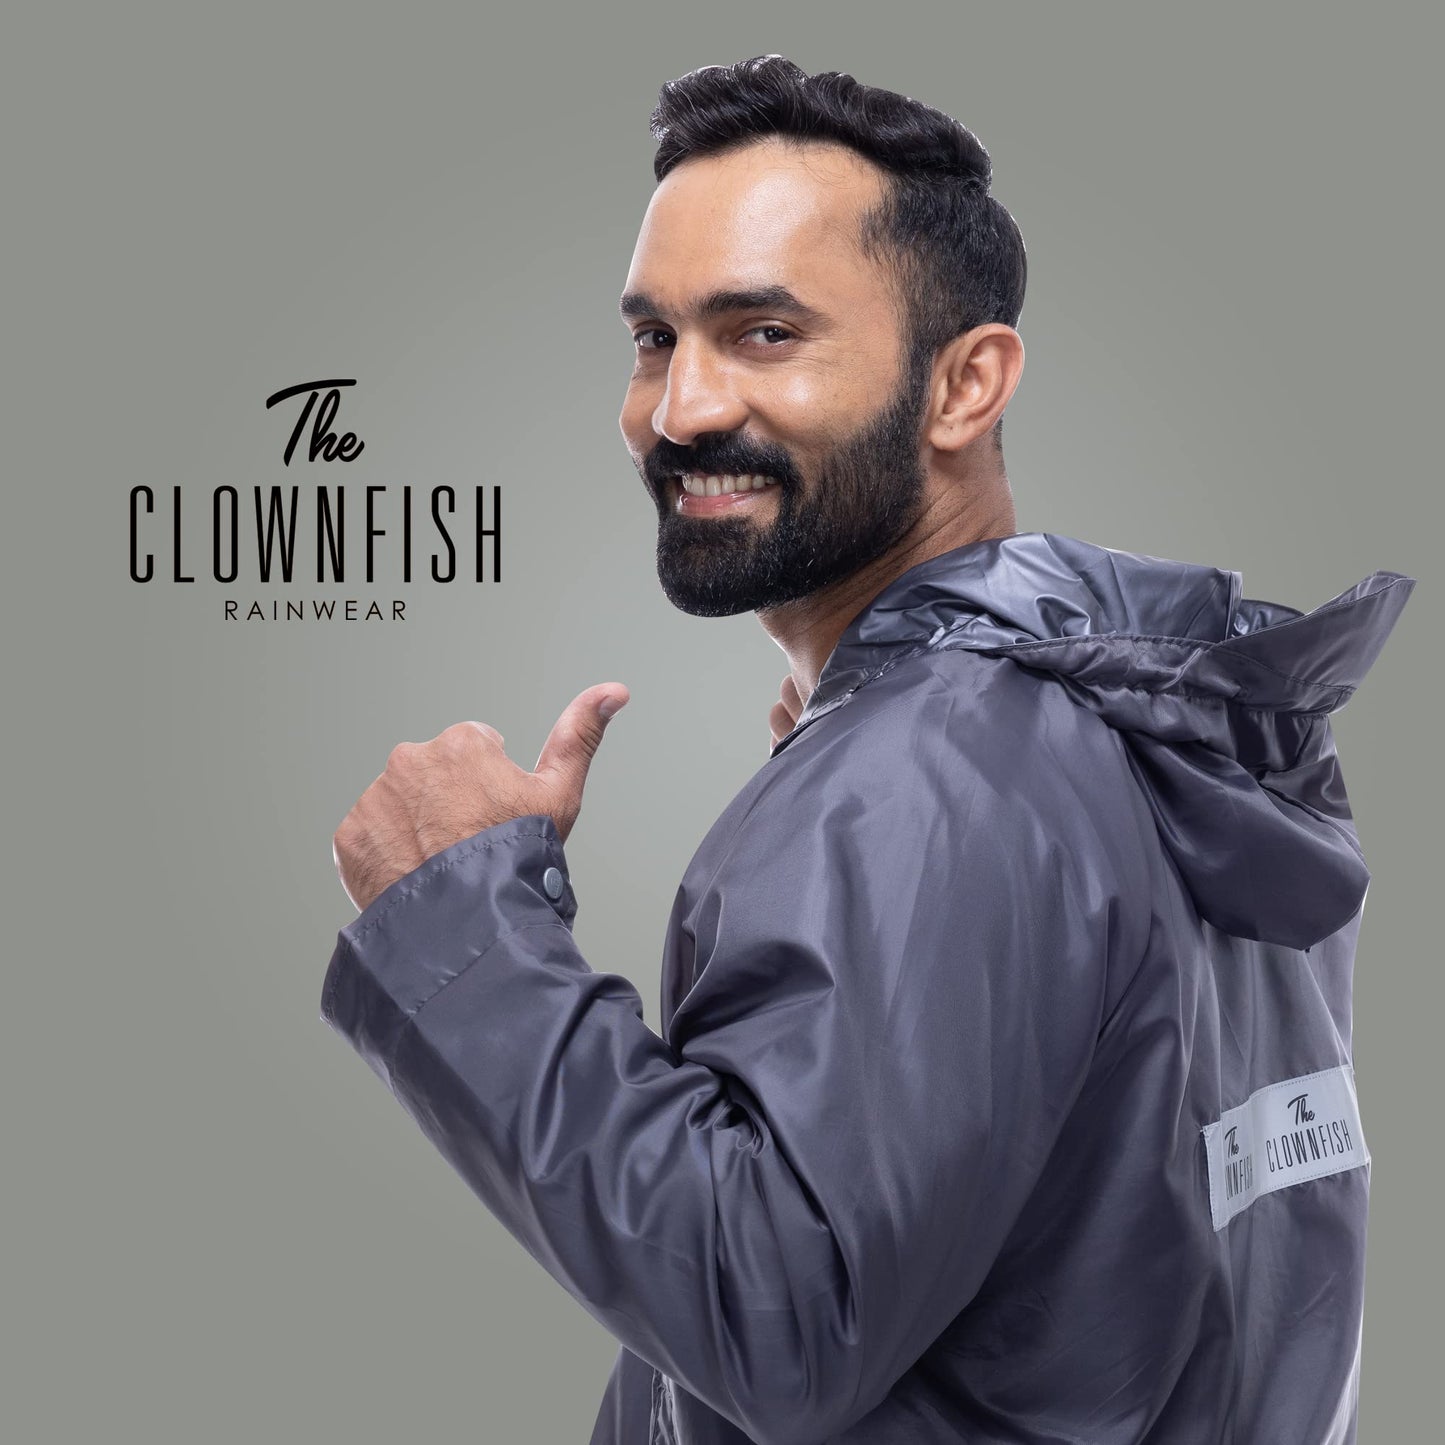 THE CLOWNFISH Rain Coat for Men Waterproof Raincoat with Pants Polyester Reversible Double Layer Rain Coat For Men Bike Rain Suit Rain Jacket Suit Inner Mobile Pocket with Storage Bag (Brown XL)